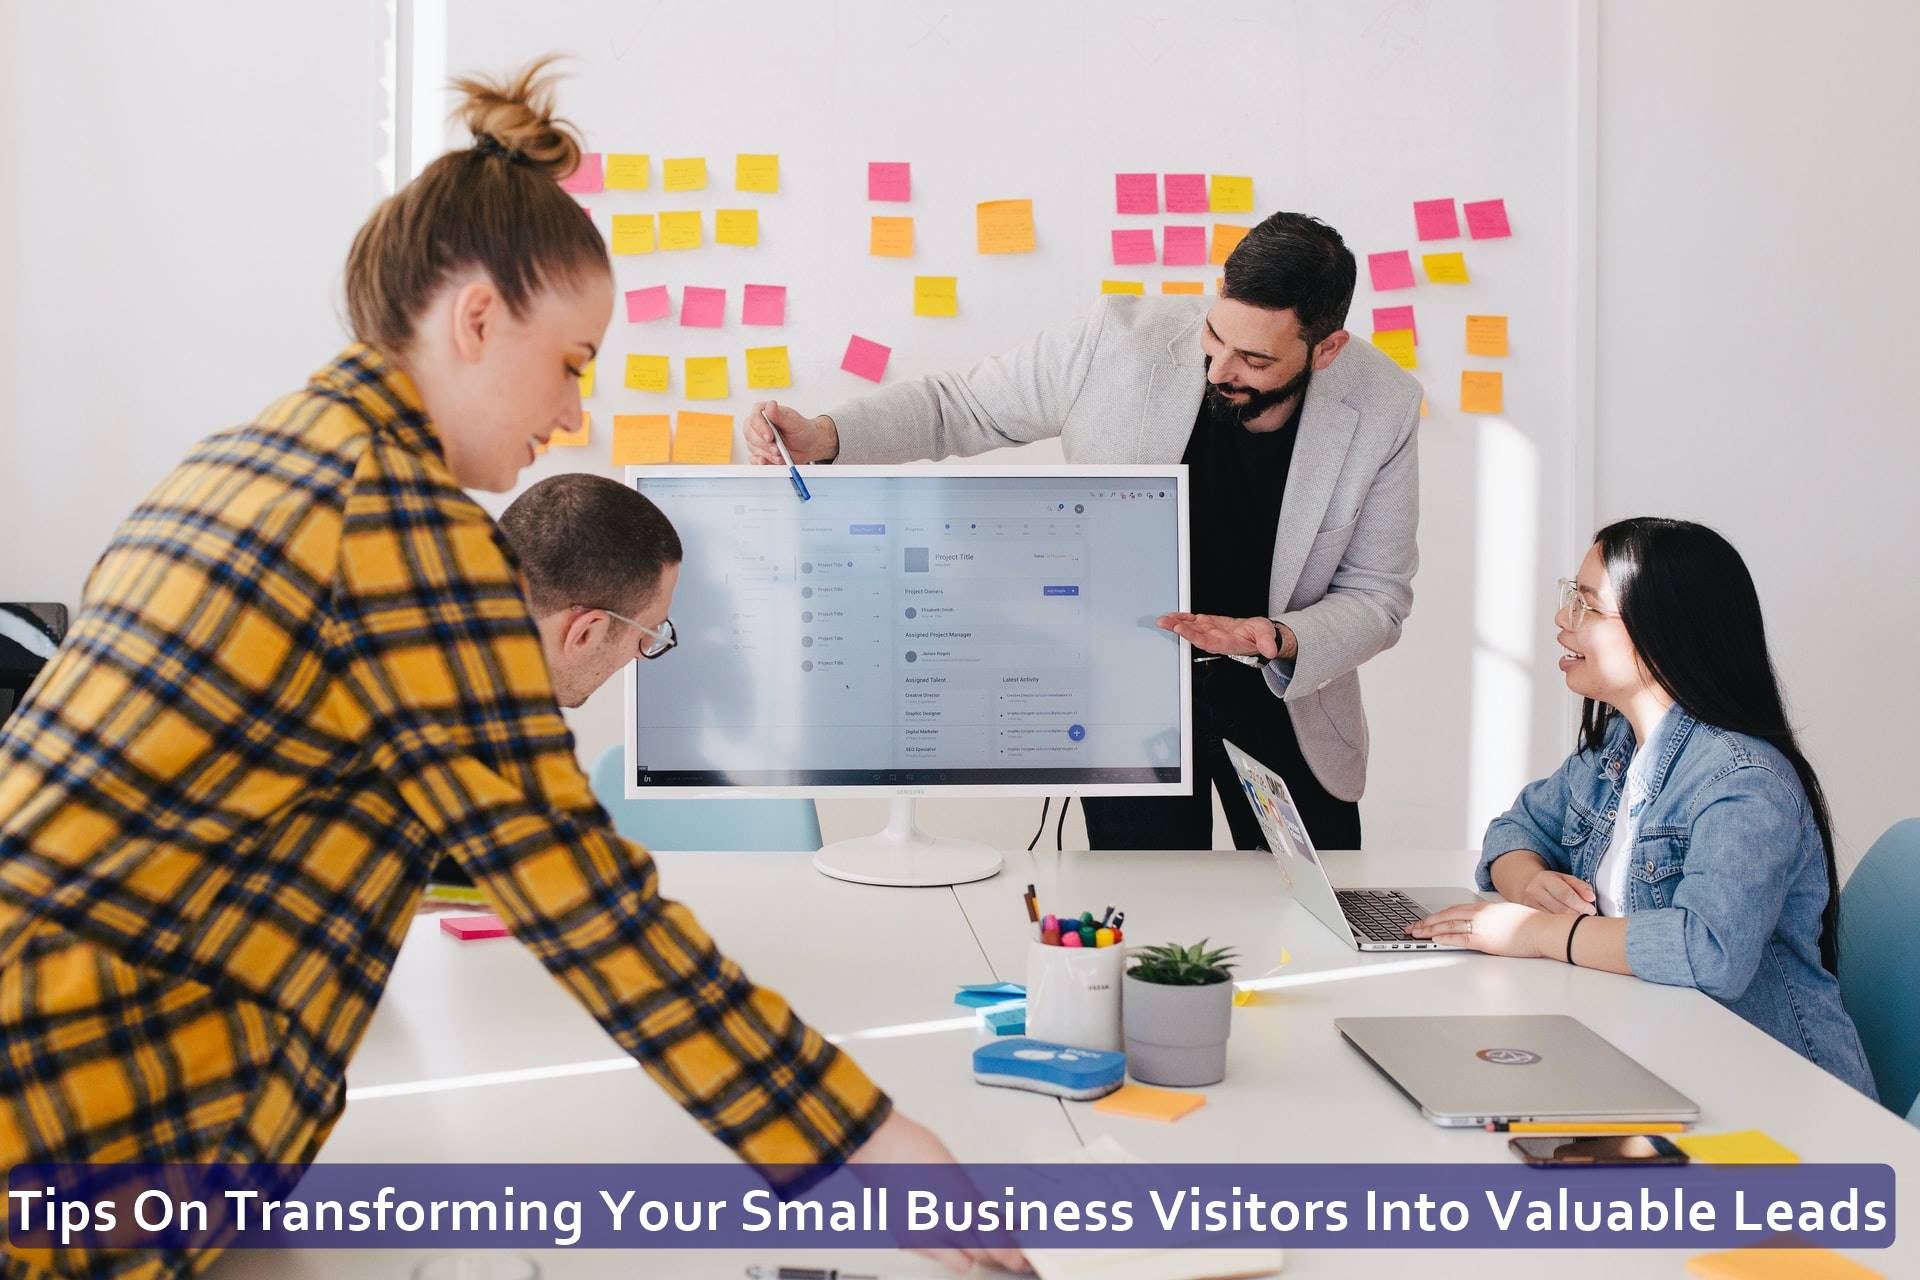 Tips On Transforming Your Small Business Visitors Into Valuable Leads